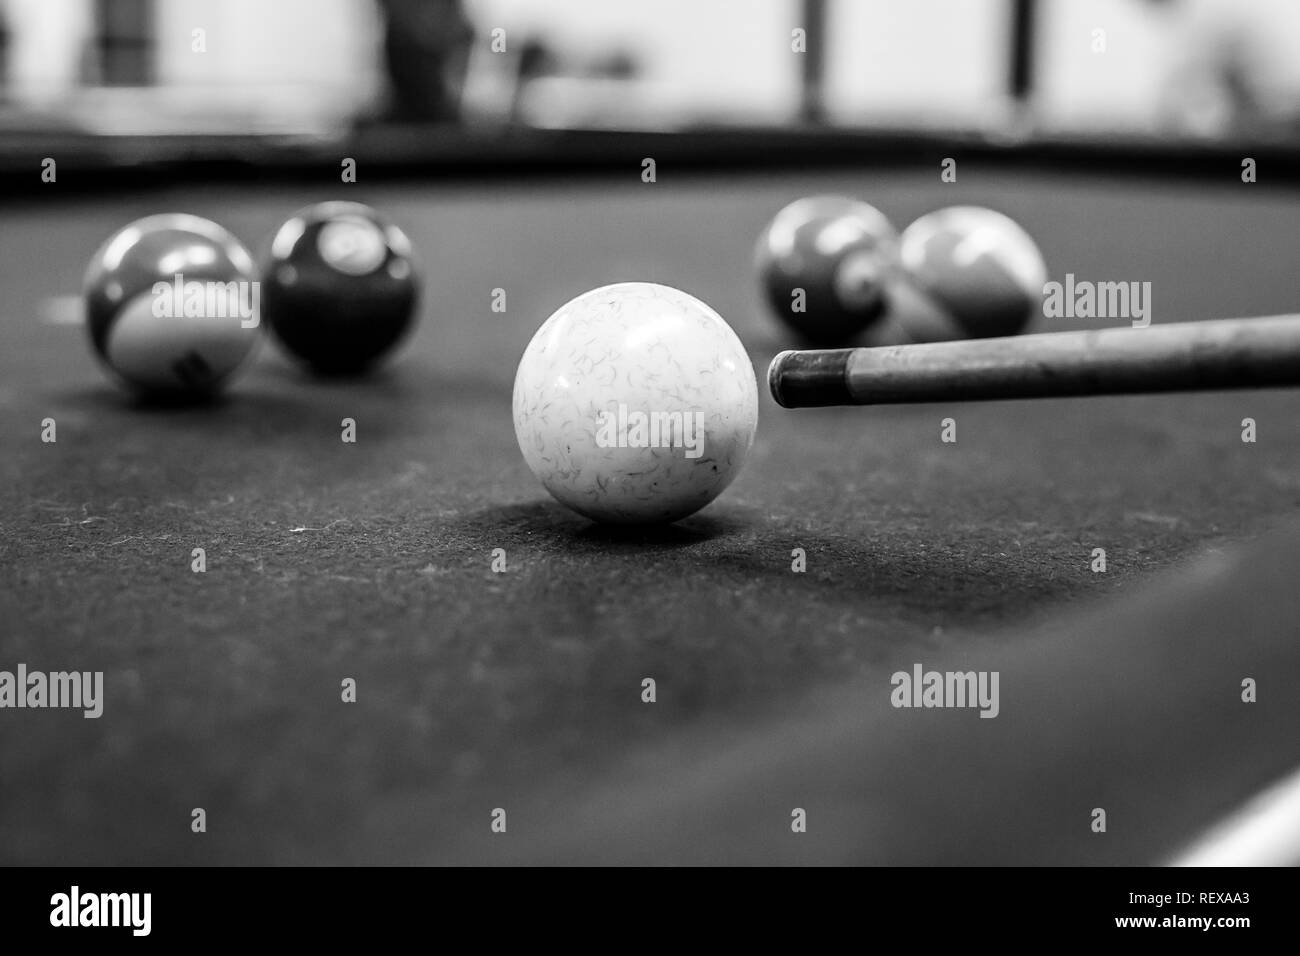 Cue ball about to be hit on a pool table in black and white Stock Photo